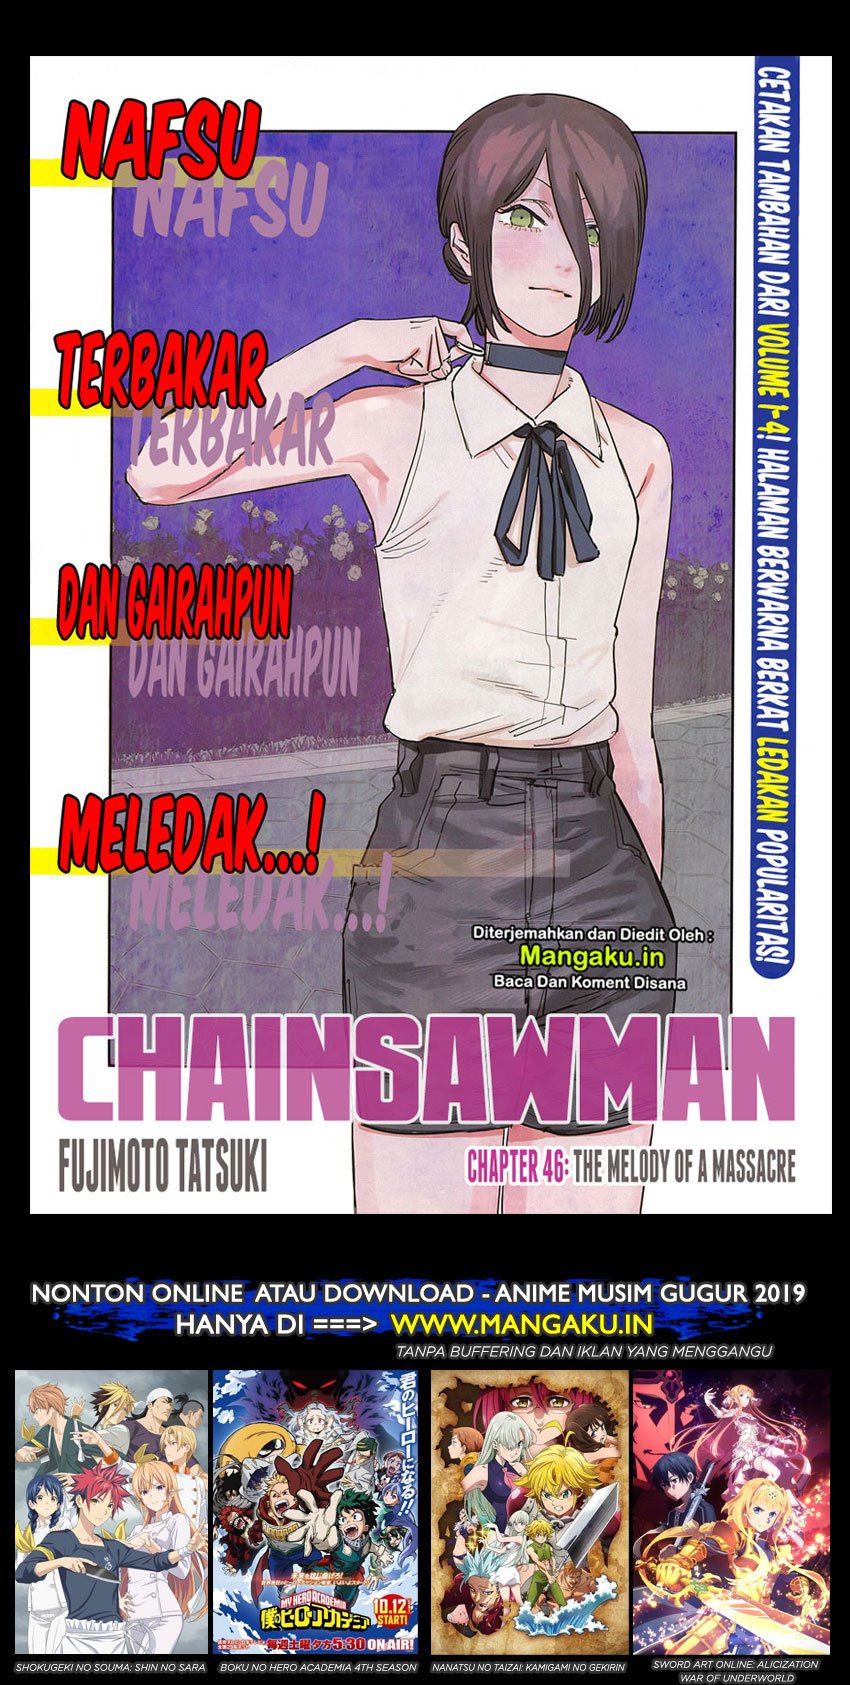 Chainsaw Man Chapter 46